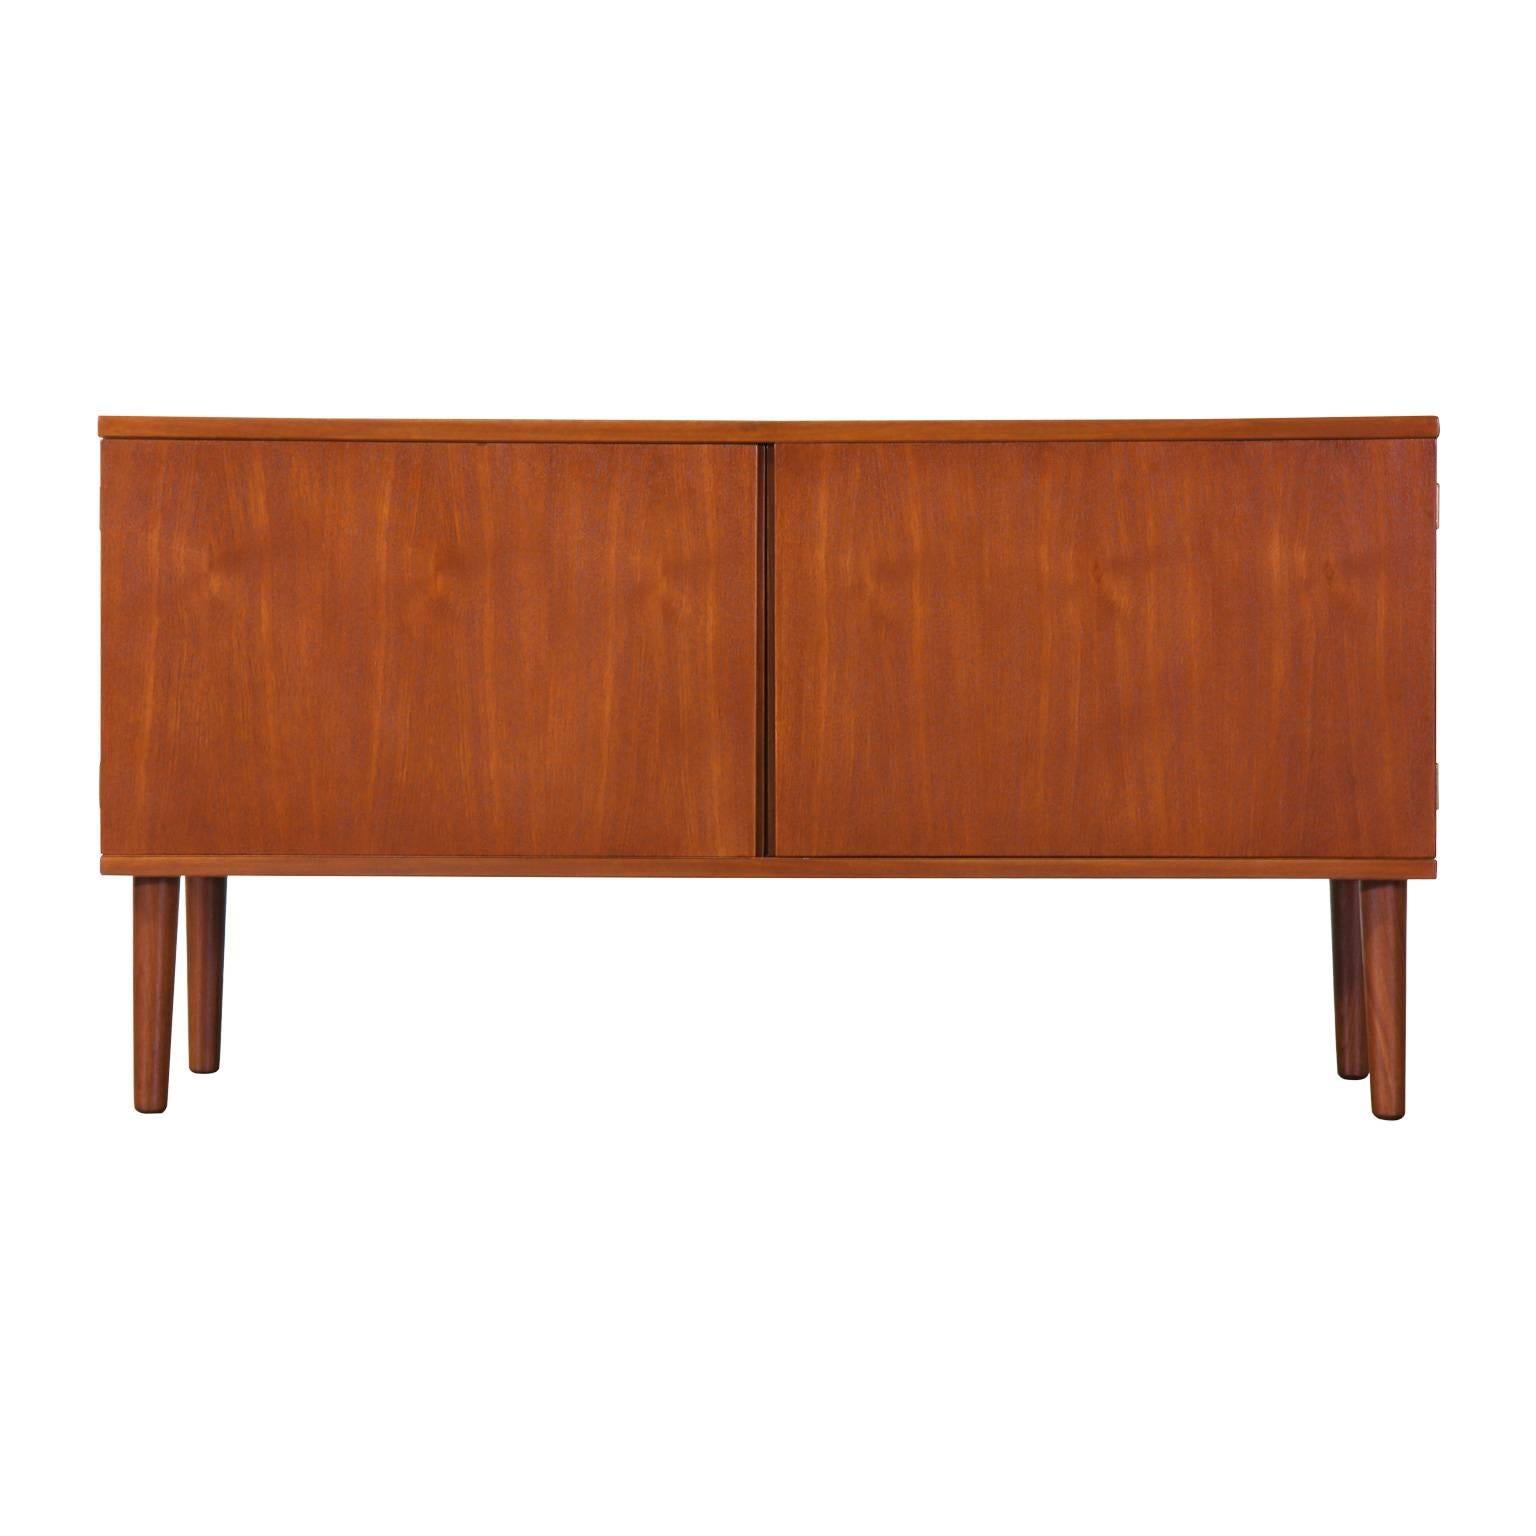 Designer: Hans Olsen.
Manufacturer: Hans Olsen Designs.
Period/Style: Danish modern.
Country: Denmark,
Date: 1960s.

Dimensions: 26.5″ H x 50″ L x 16″ W.
Materials: Teak.
Condition: Excellent, newly refinished.
Number of items: One.
ID